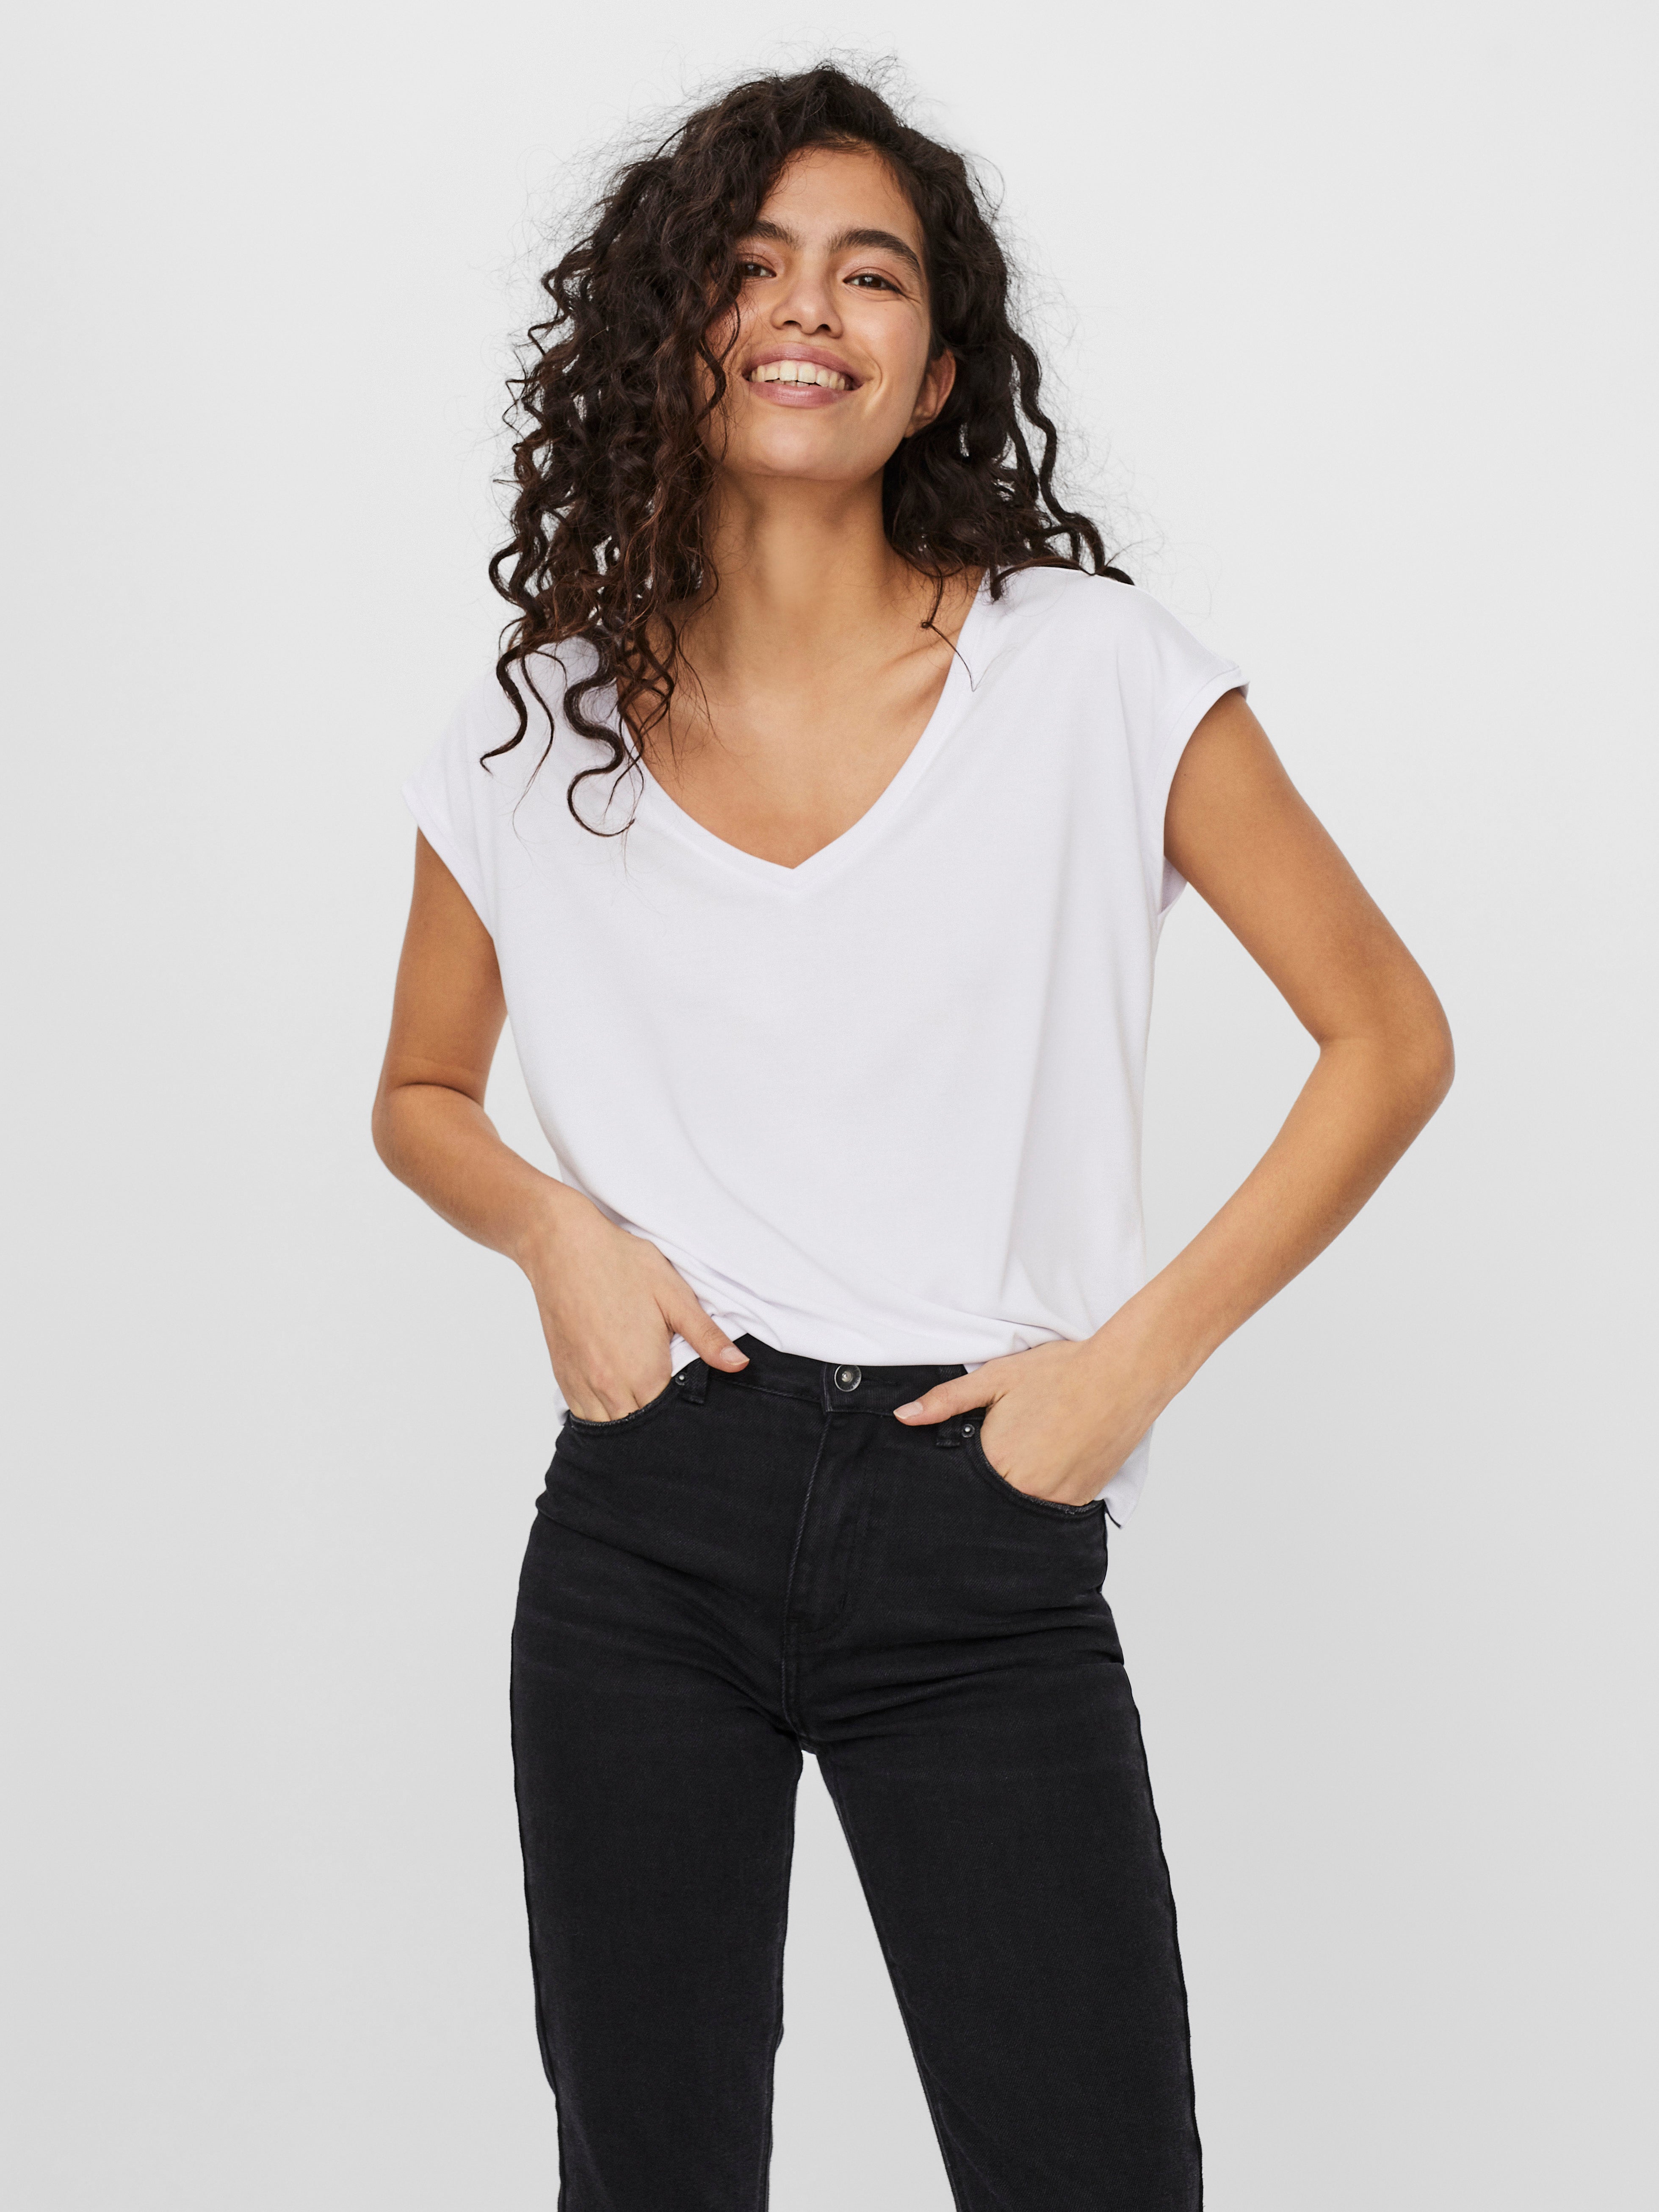 Mode Tops Blouse topjes She’s crazy Berlin She\u2019s crazy Berlin Blouse topje zwart casual uitstraling 